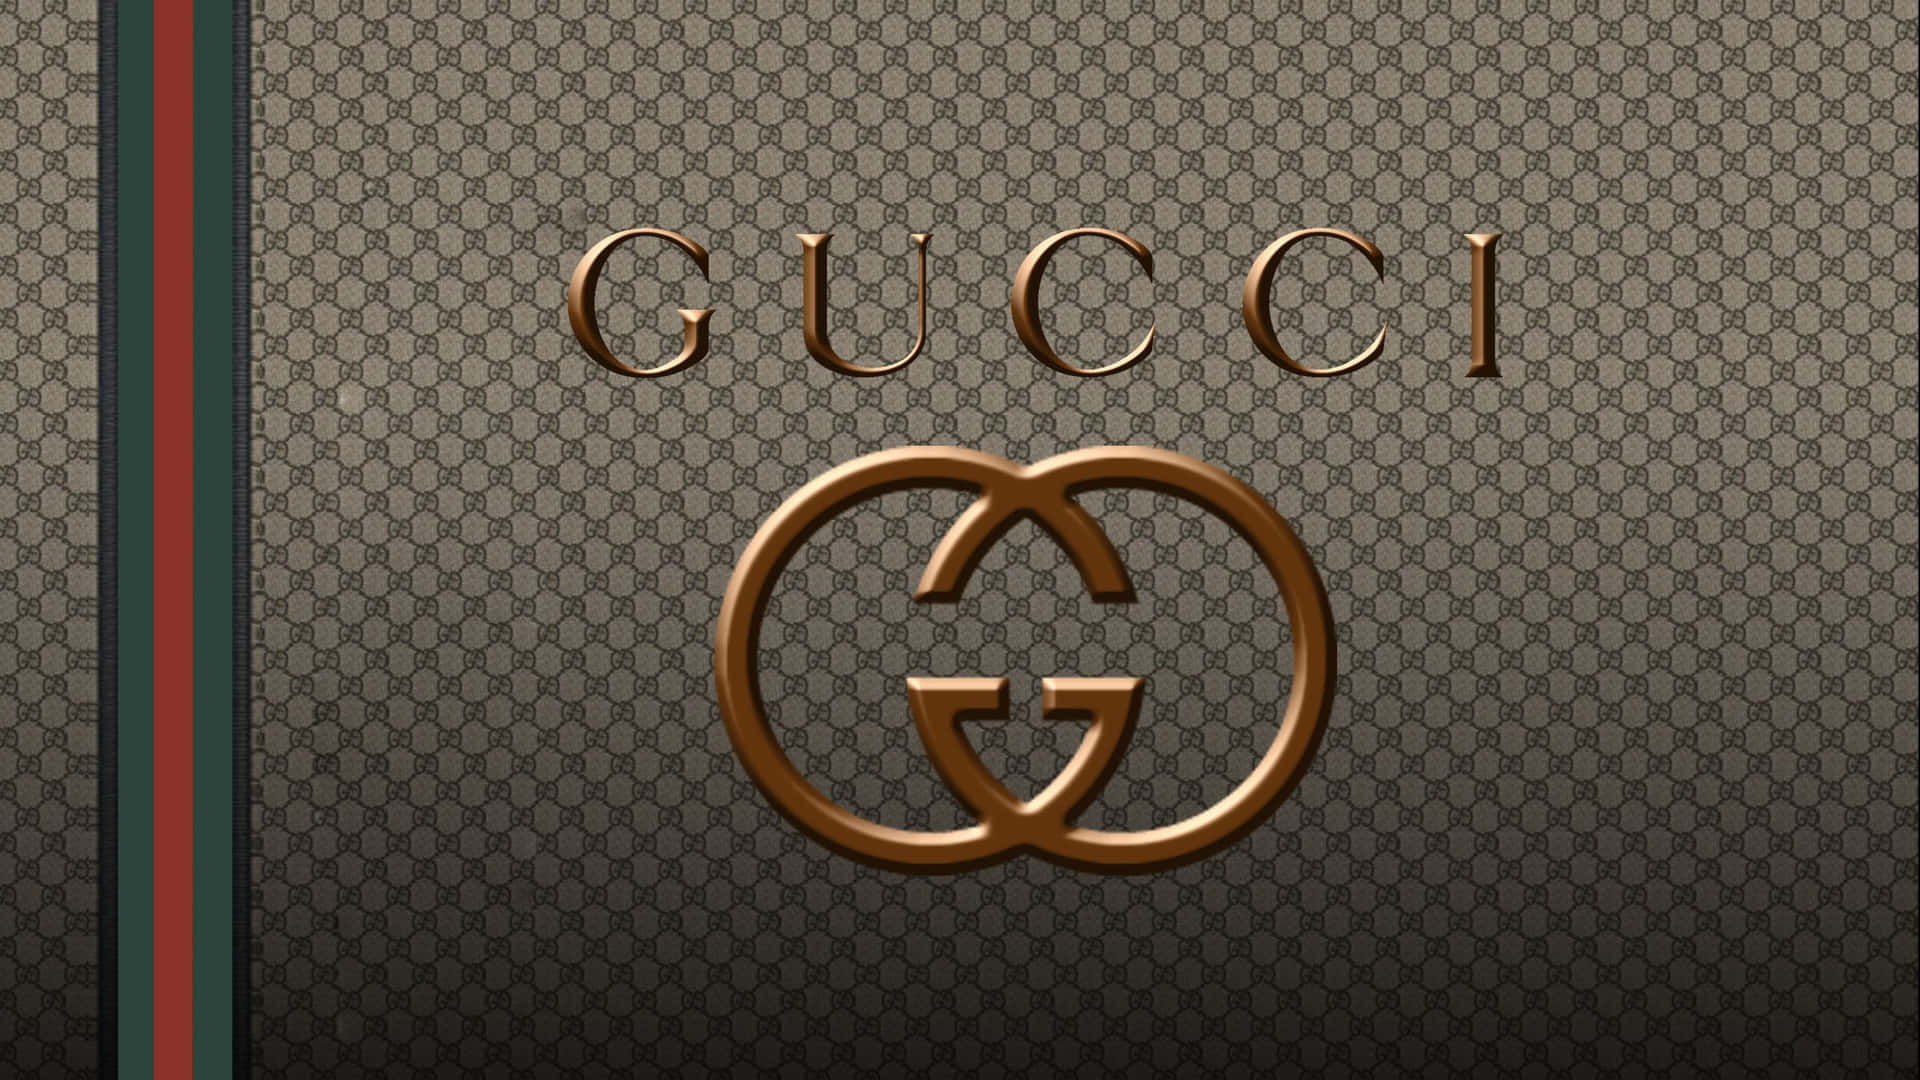 Representing the pinnacle of luxury goods, these luxury brands exude quality and elegance. Wallpaper